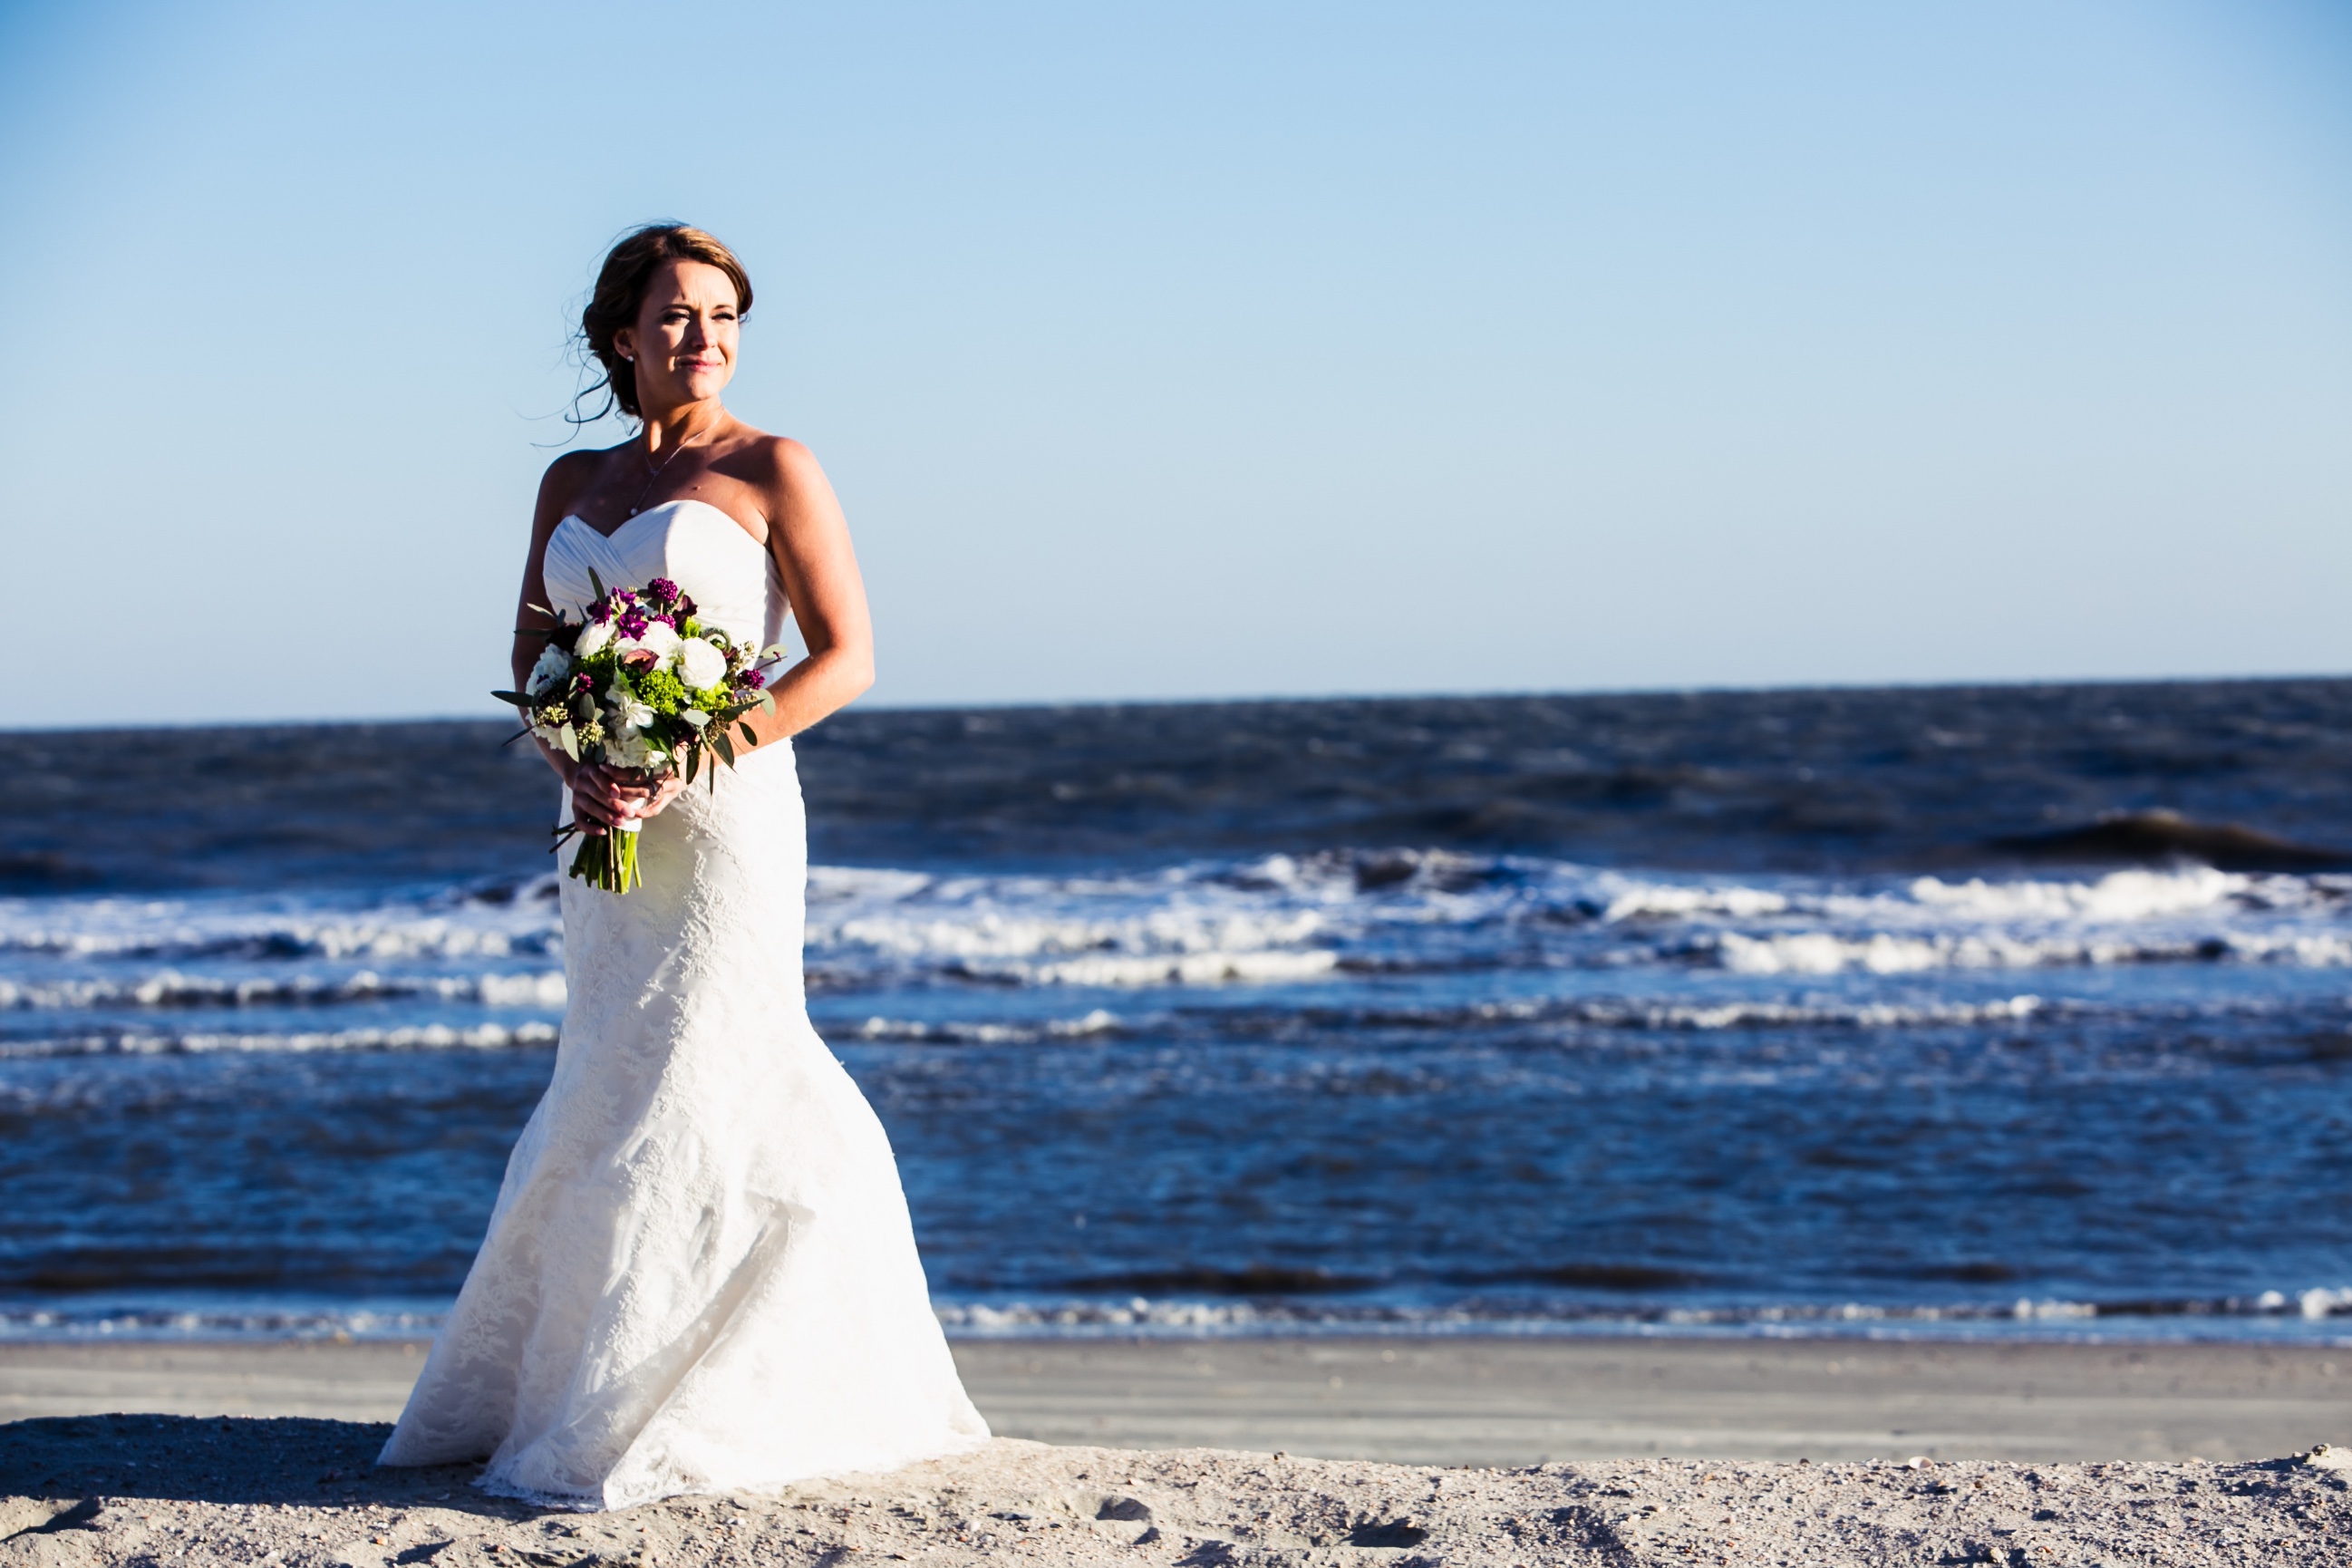 5 Tips To Find Your Destination Wedding Photographer 6611